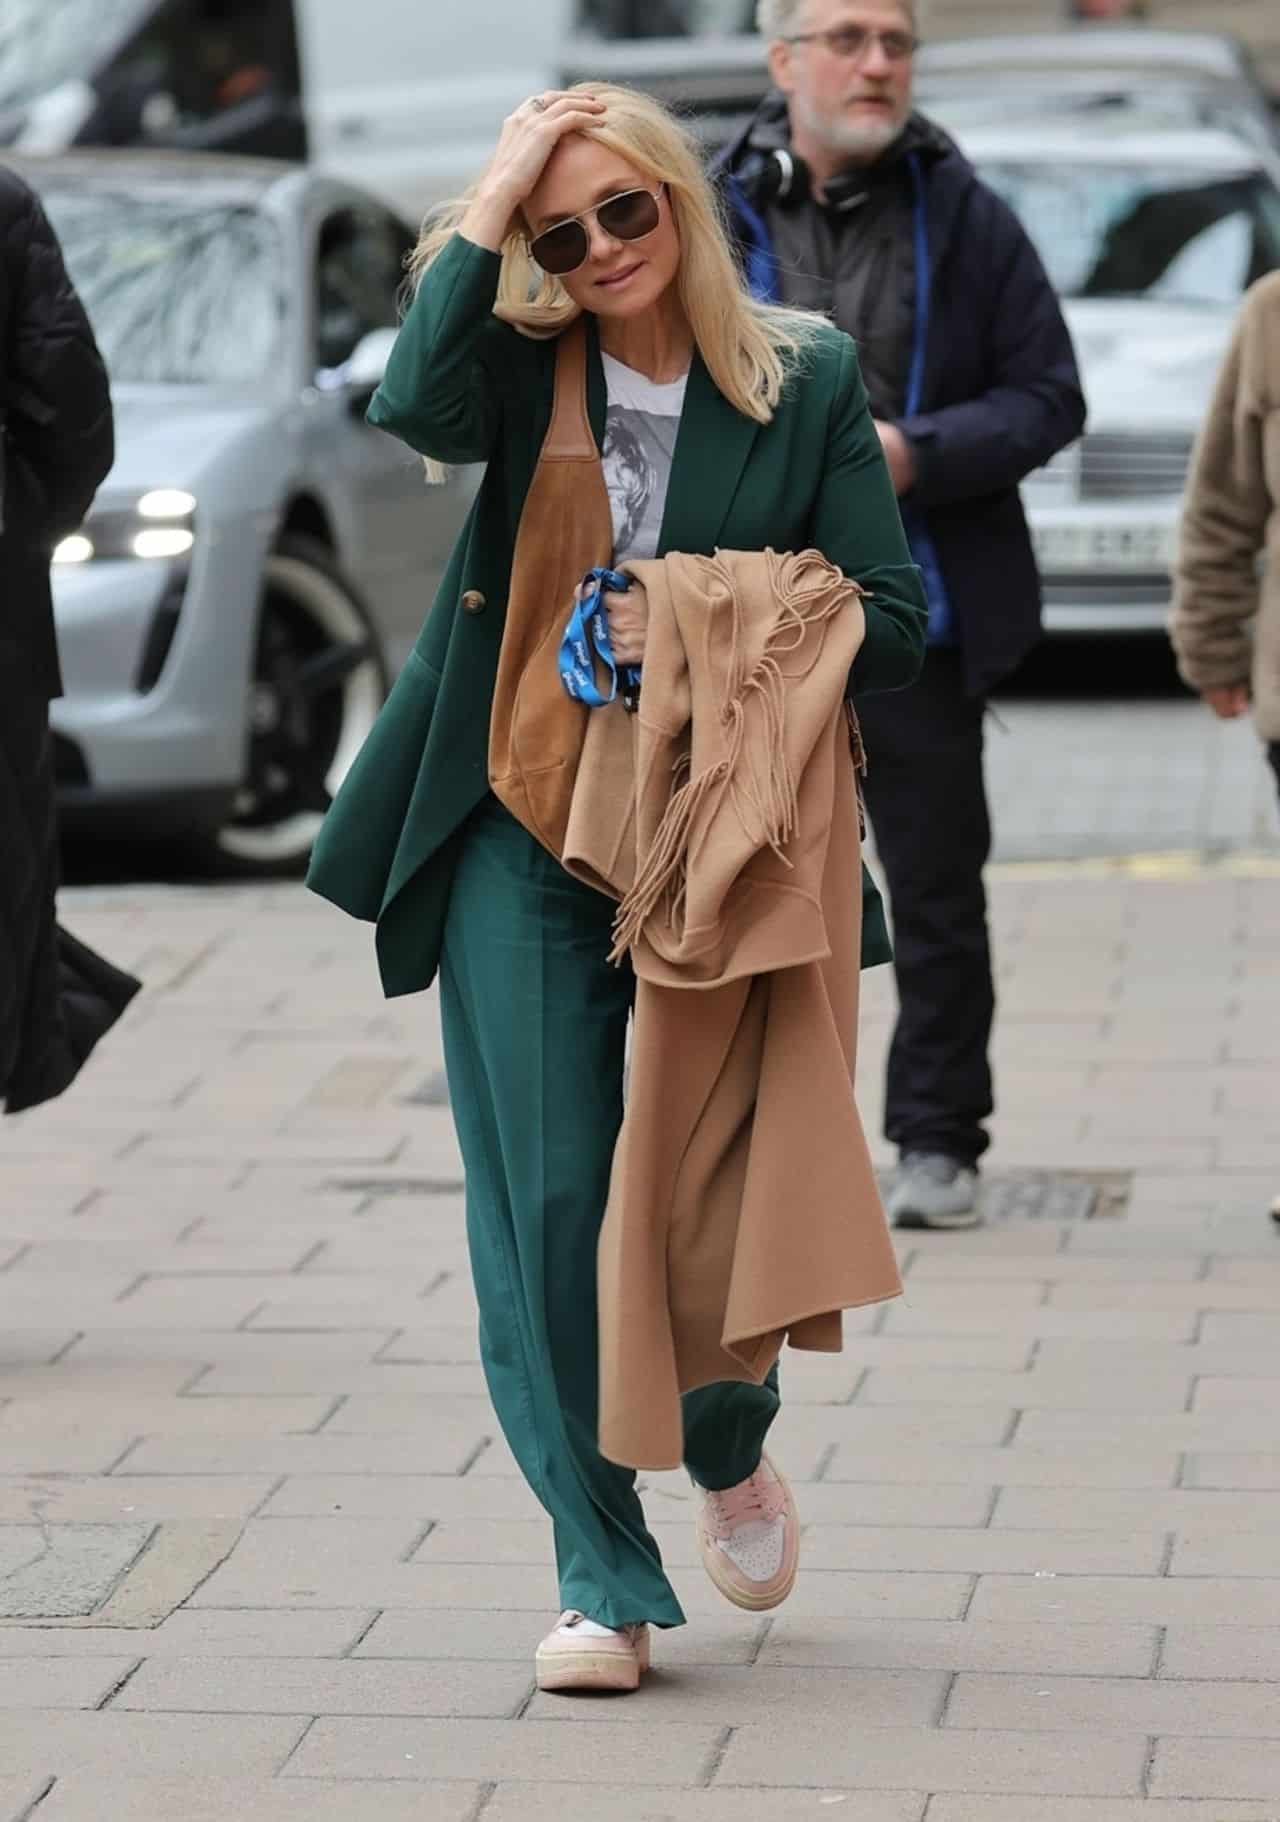 emma bunton charms london with her catchy style and grace 4